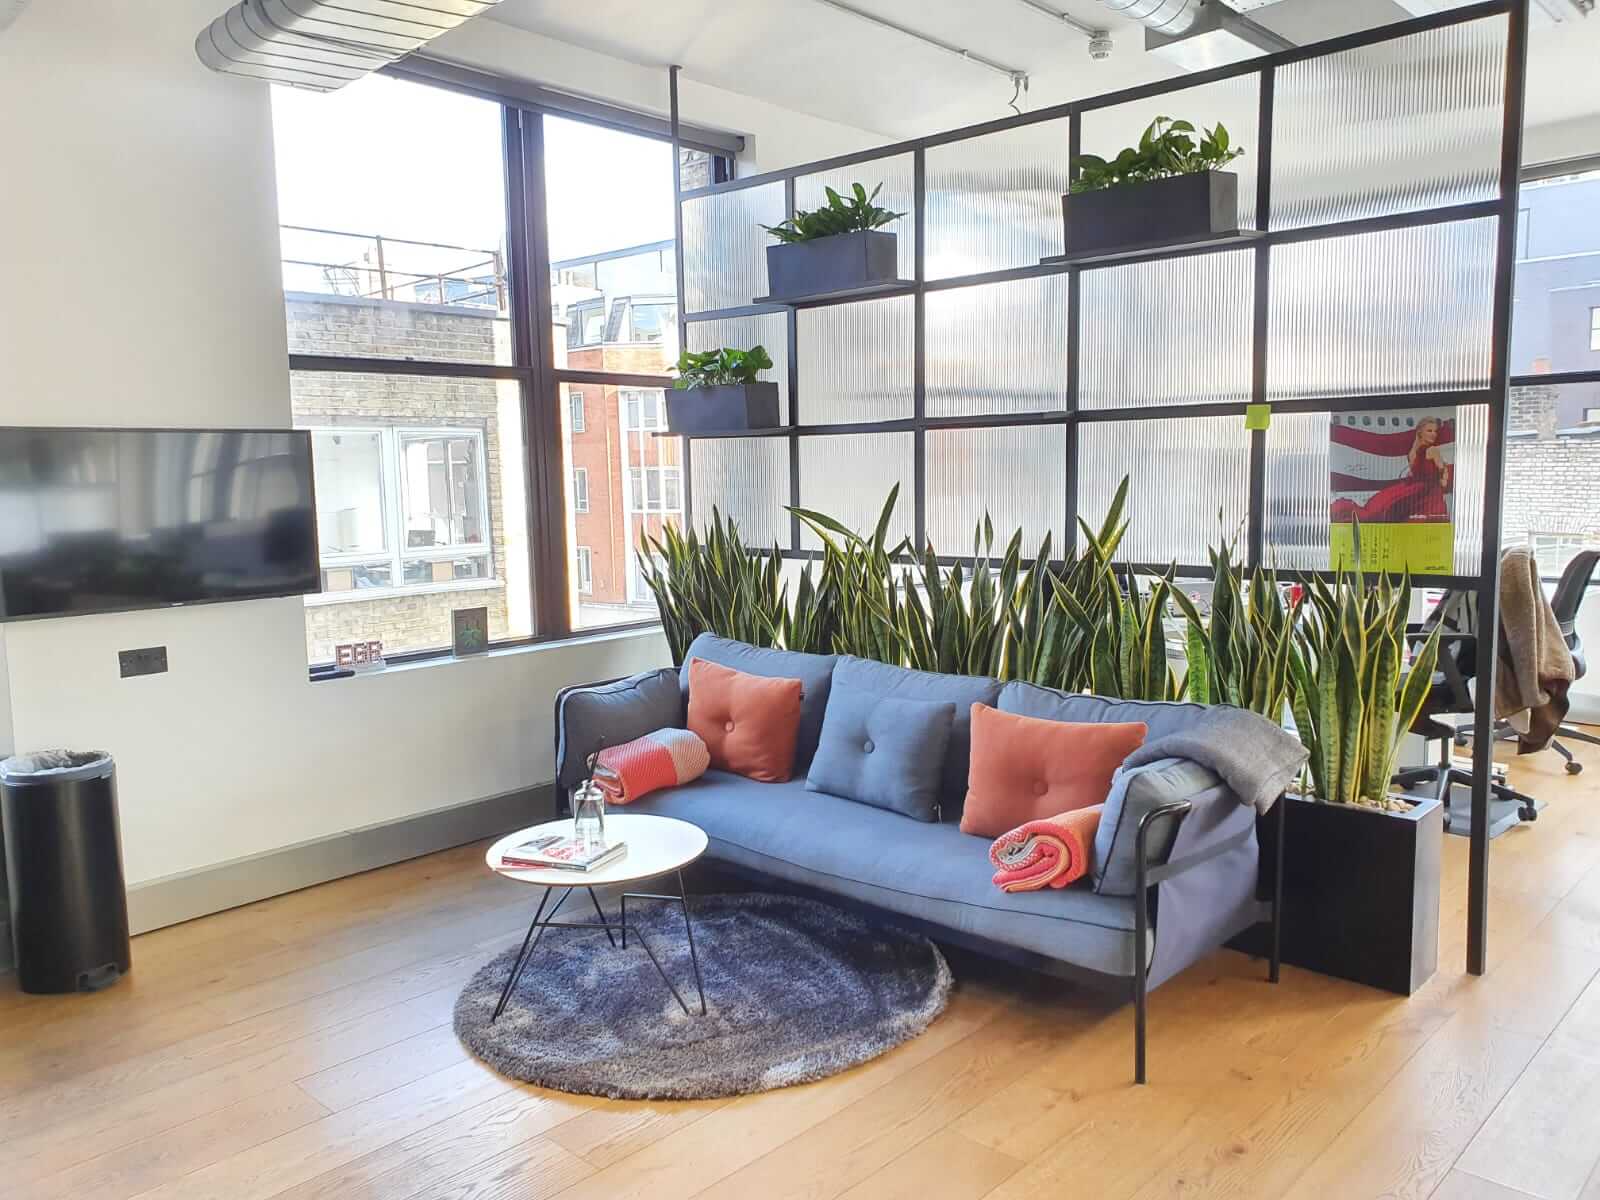 Office space with opaque room divider filled with plants